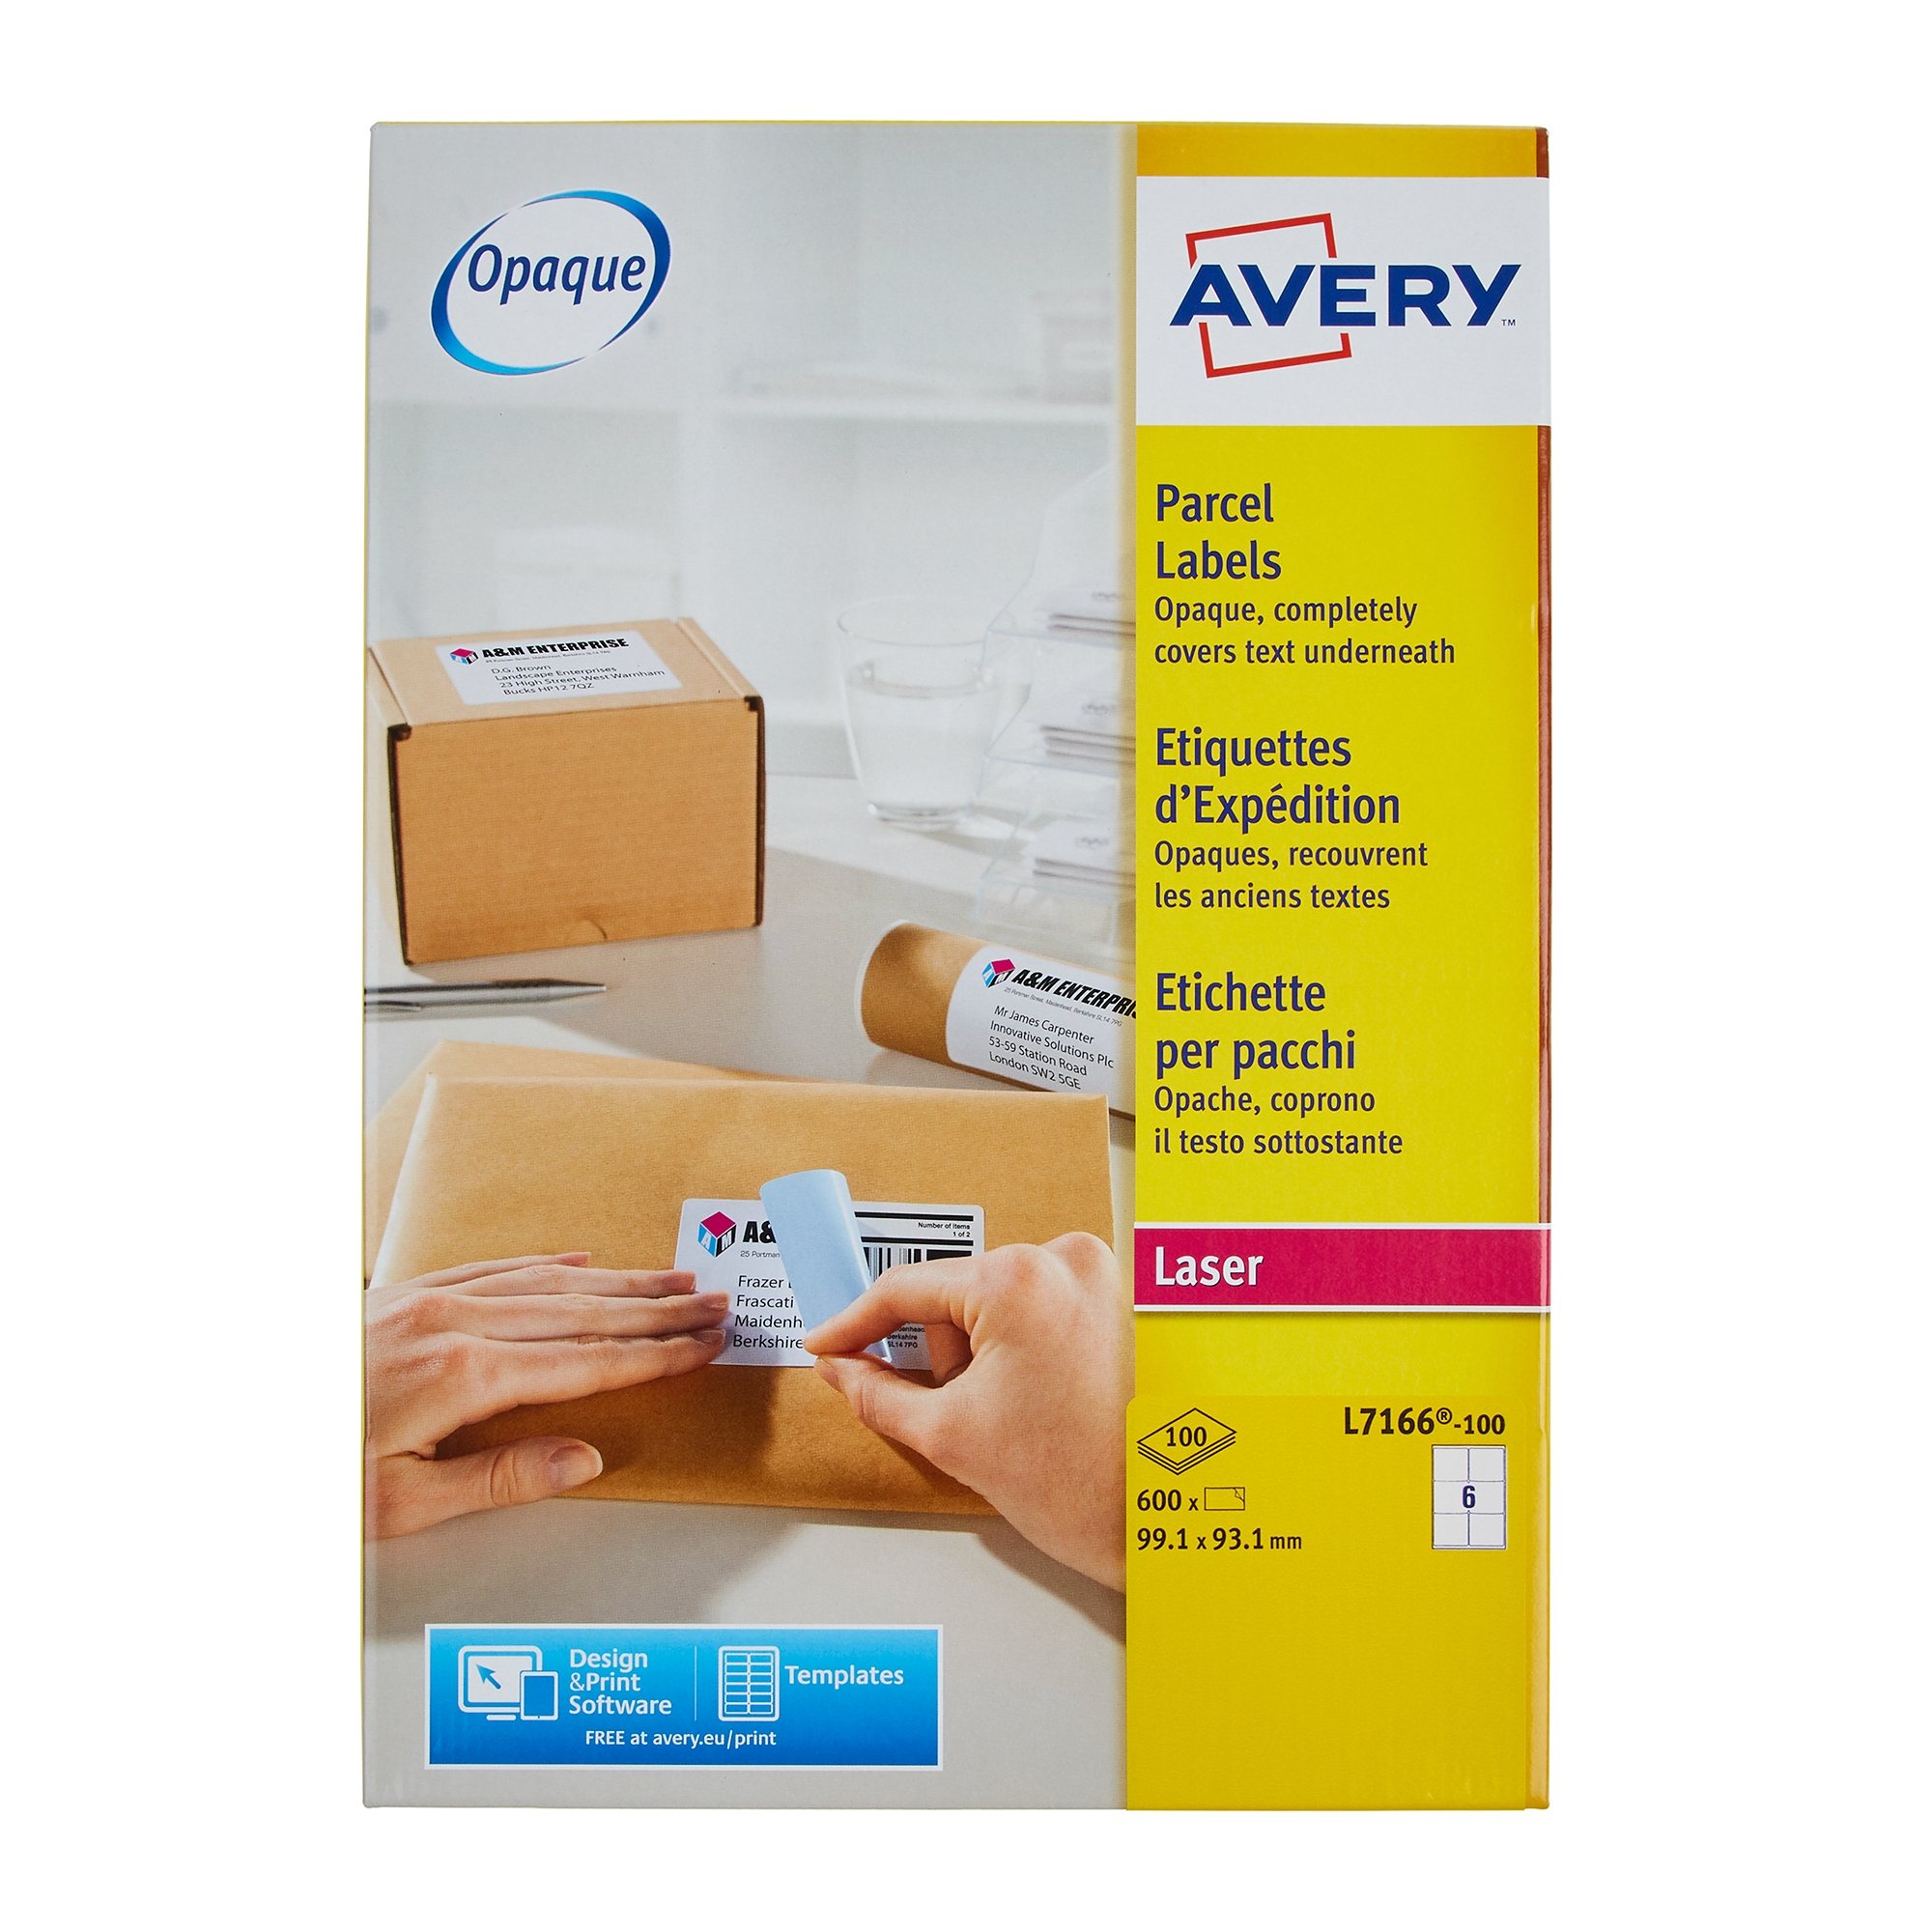 White Avery Jam-Free Quick PEEL Labels - Box of 100 Sheets